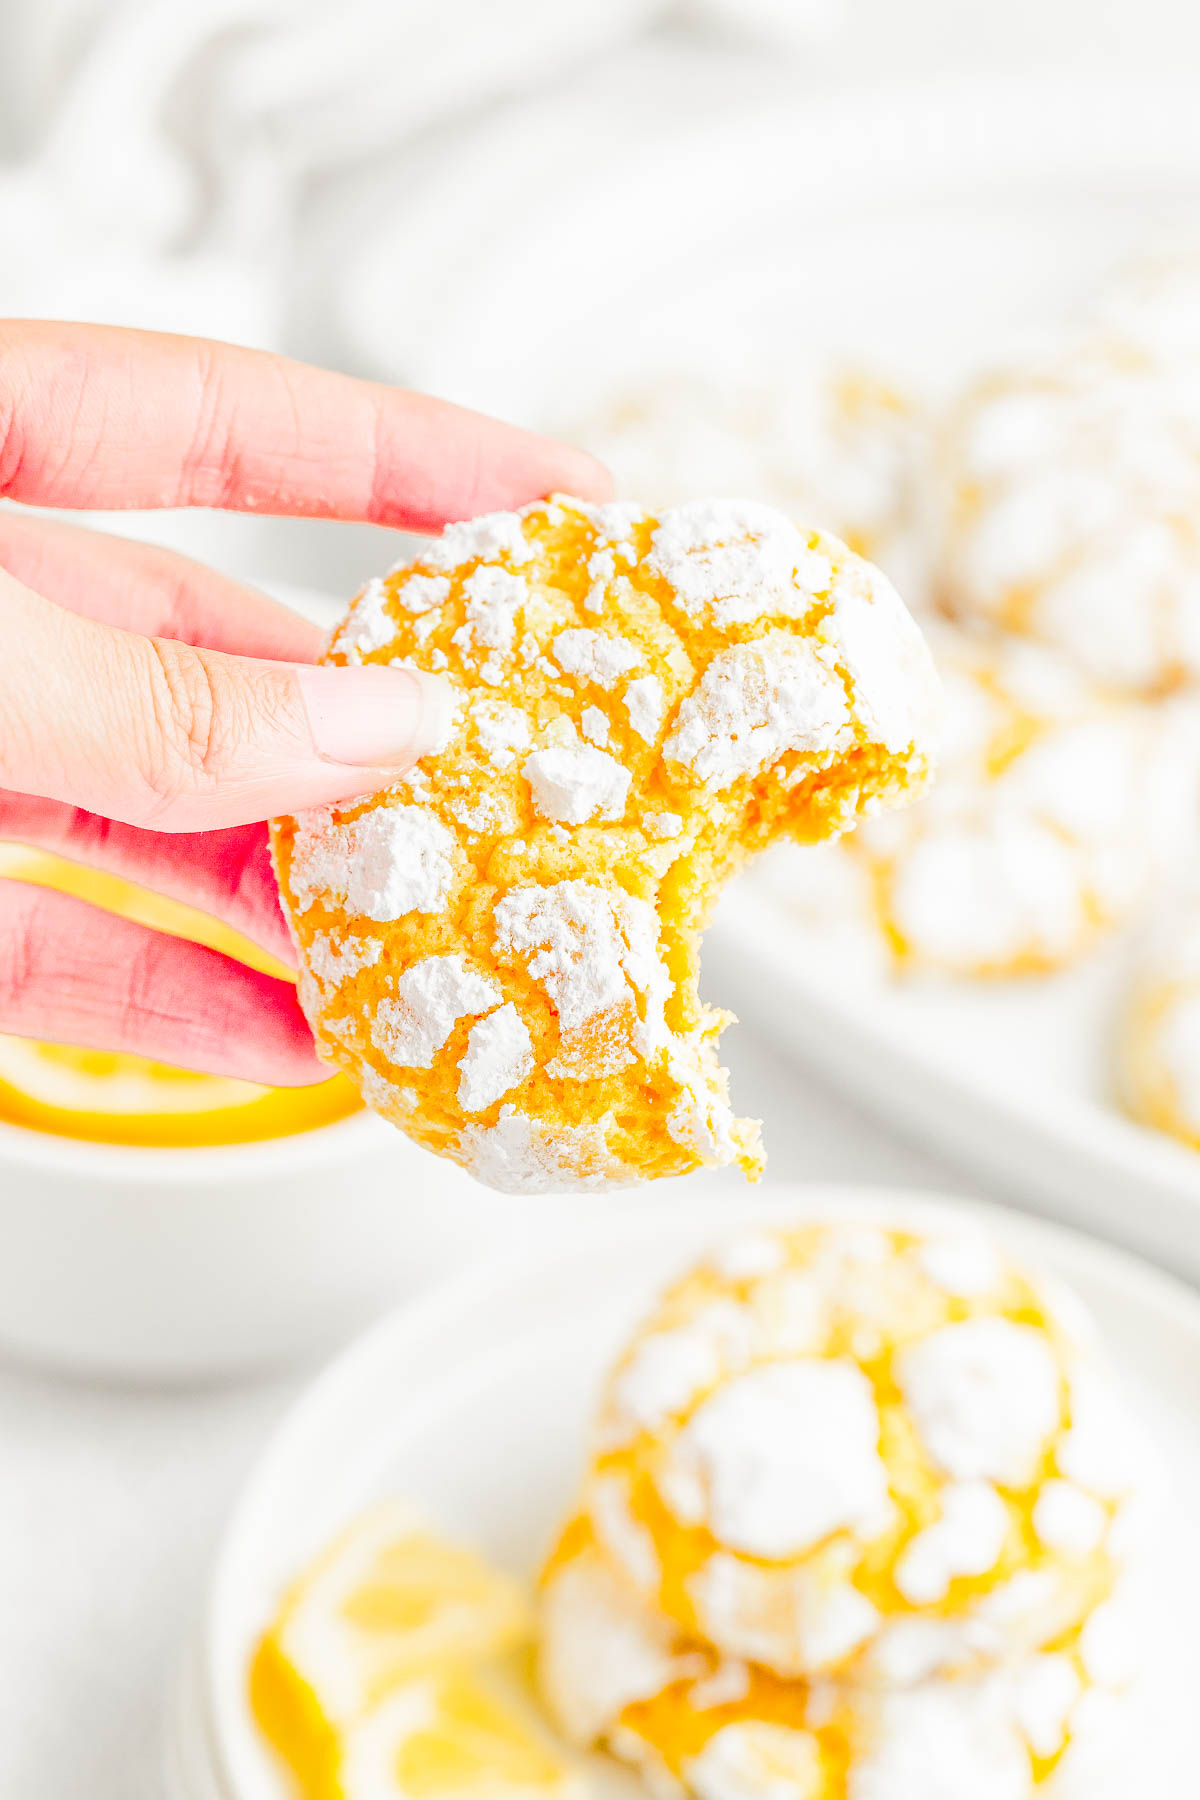 Lemon Crinkle Cookies — Lemon crinkles are pillowy soft on the inside and chewy on the outside, with slightly crispy edges from the powdered sugar coating! They taste like lemon bars, but in cookie form! The dough is flavored with lemon three ways and is perfect for holiday gatherings, Easter, Mother’s day, or whenever you’re craving an EASY lemon dessert 🍋!